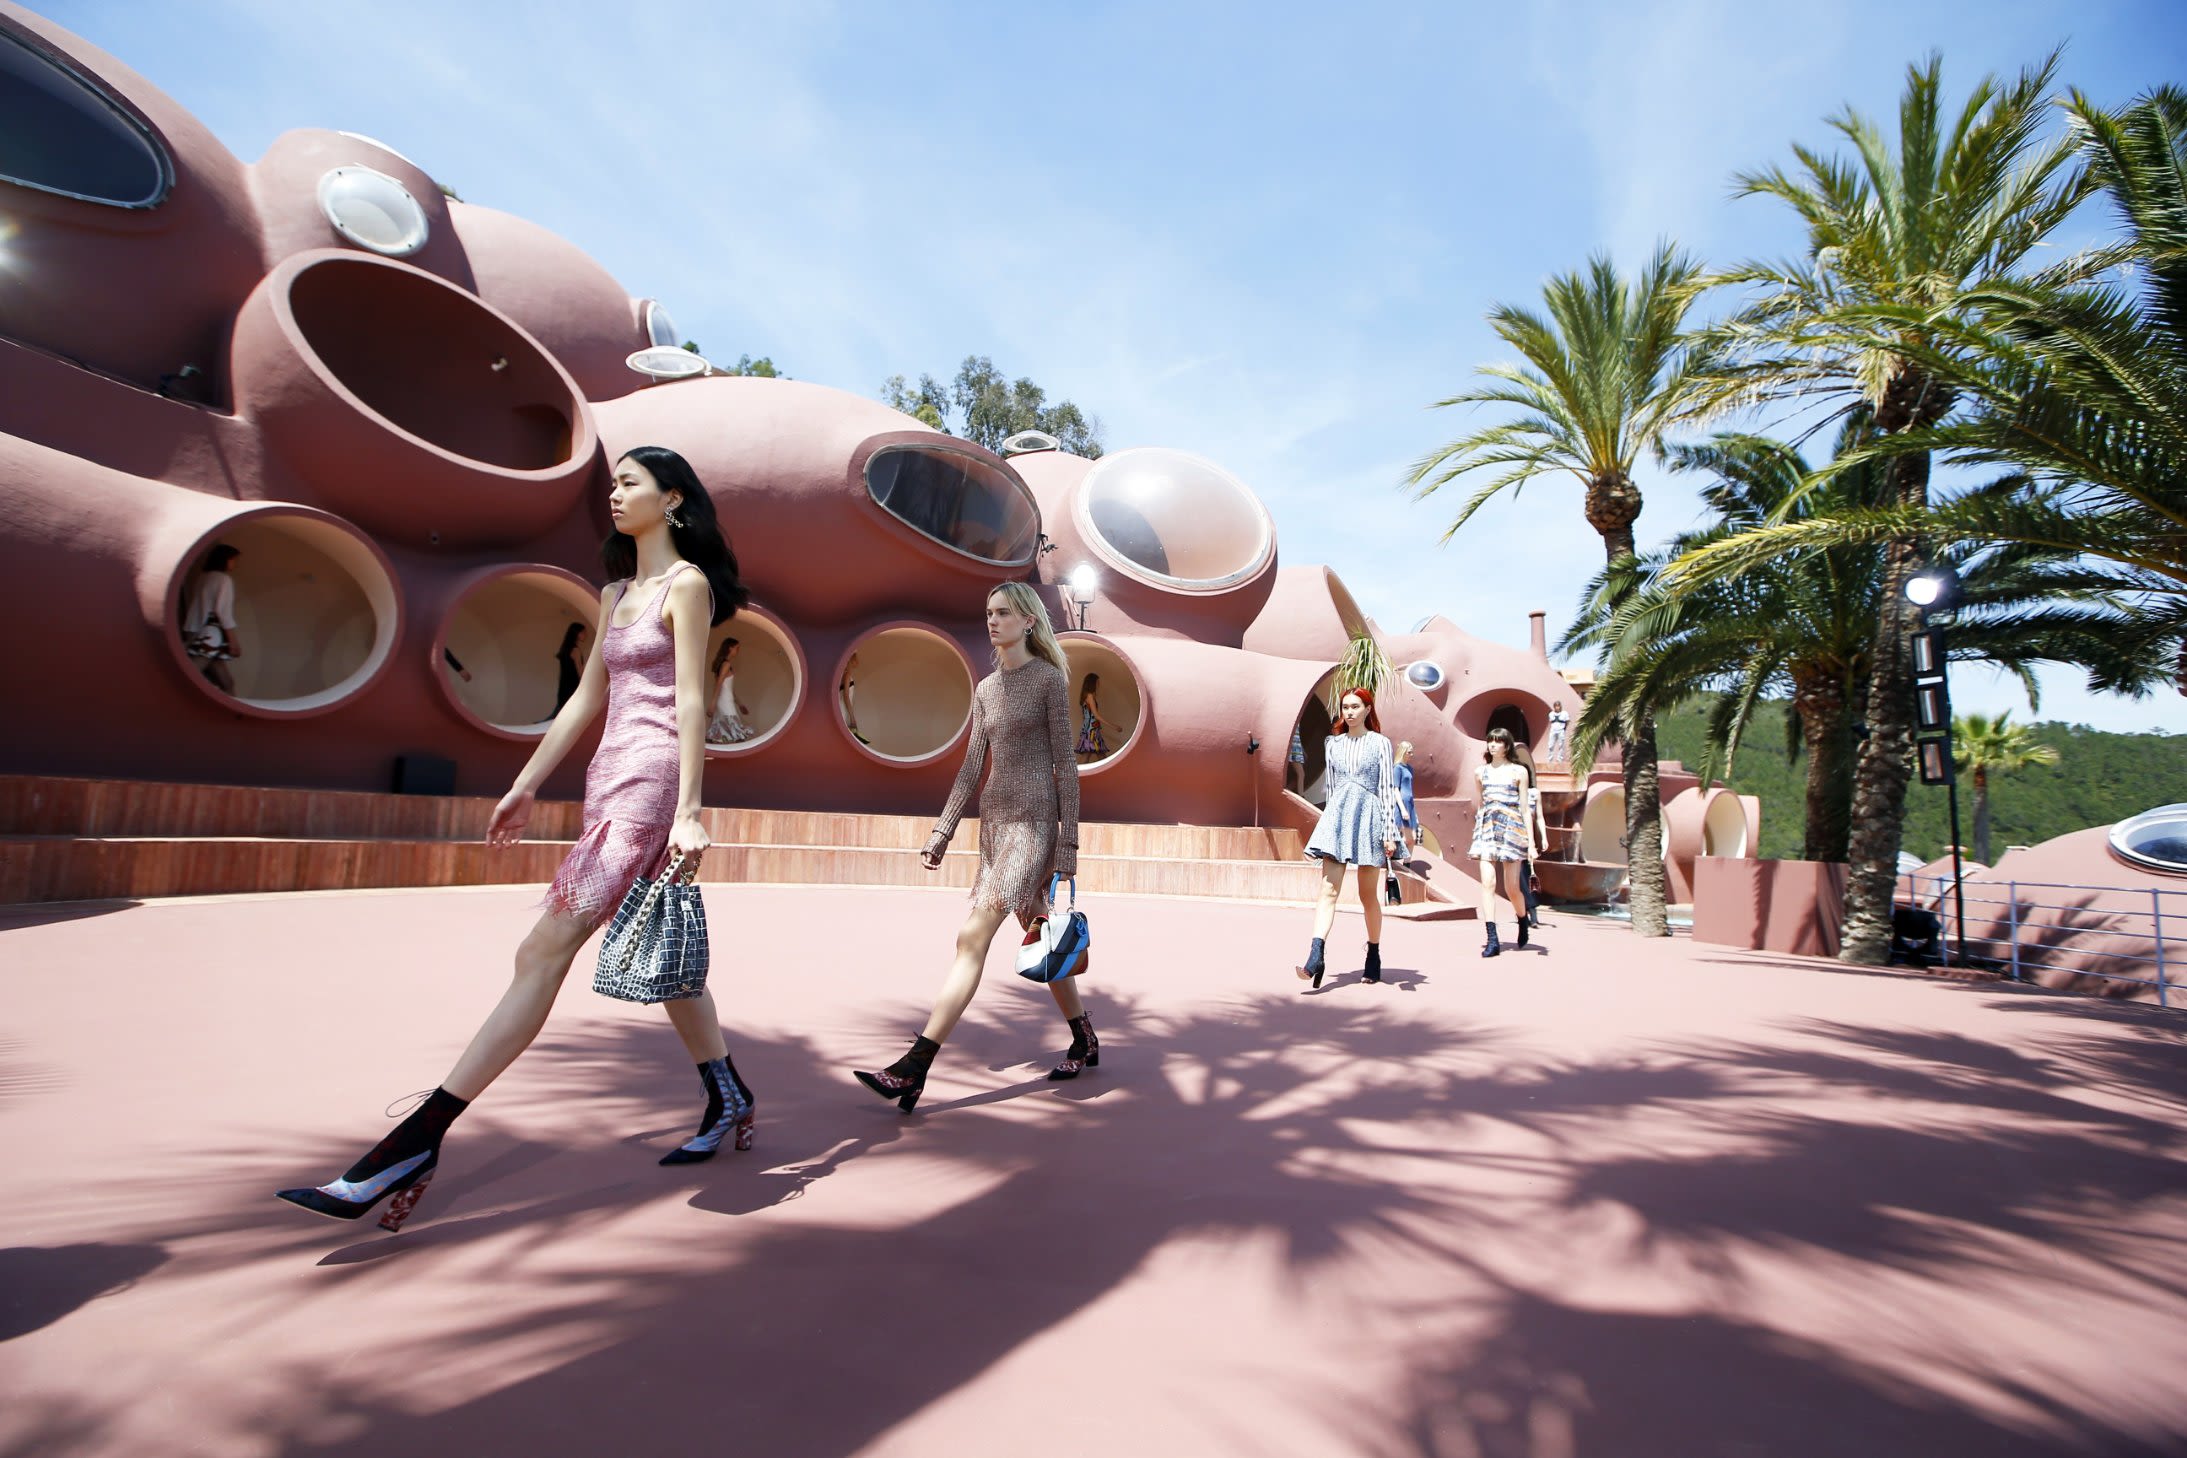 Louis Vuitton stages retro futuristic fashion show in Palm Springs - Los  Angeles Times